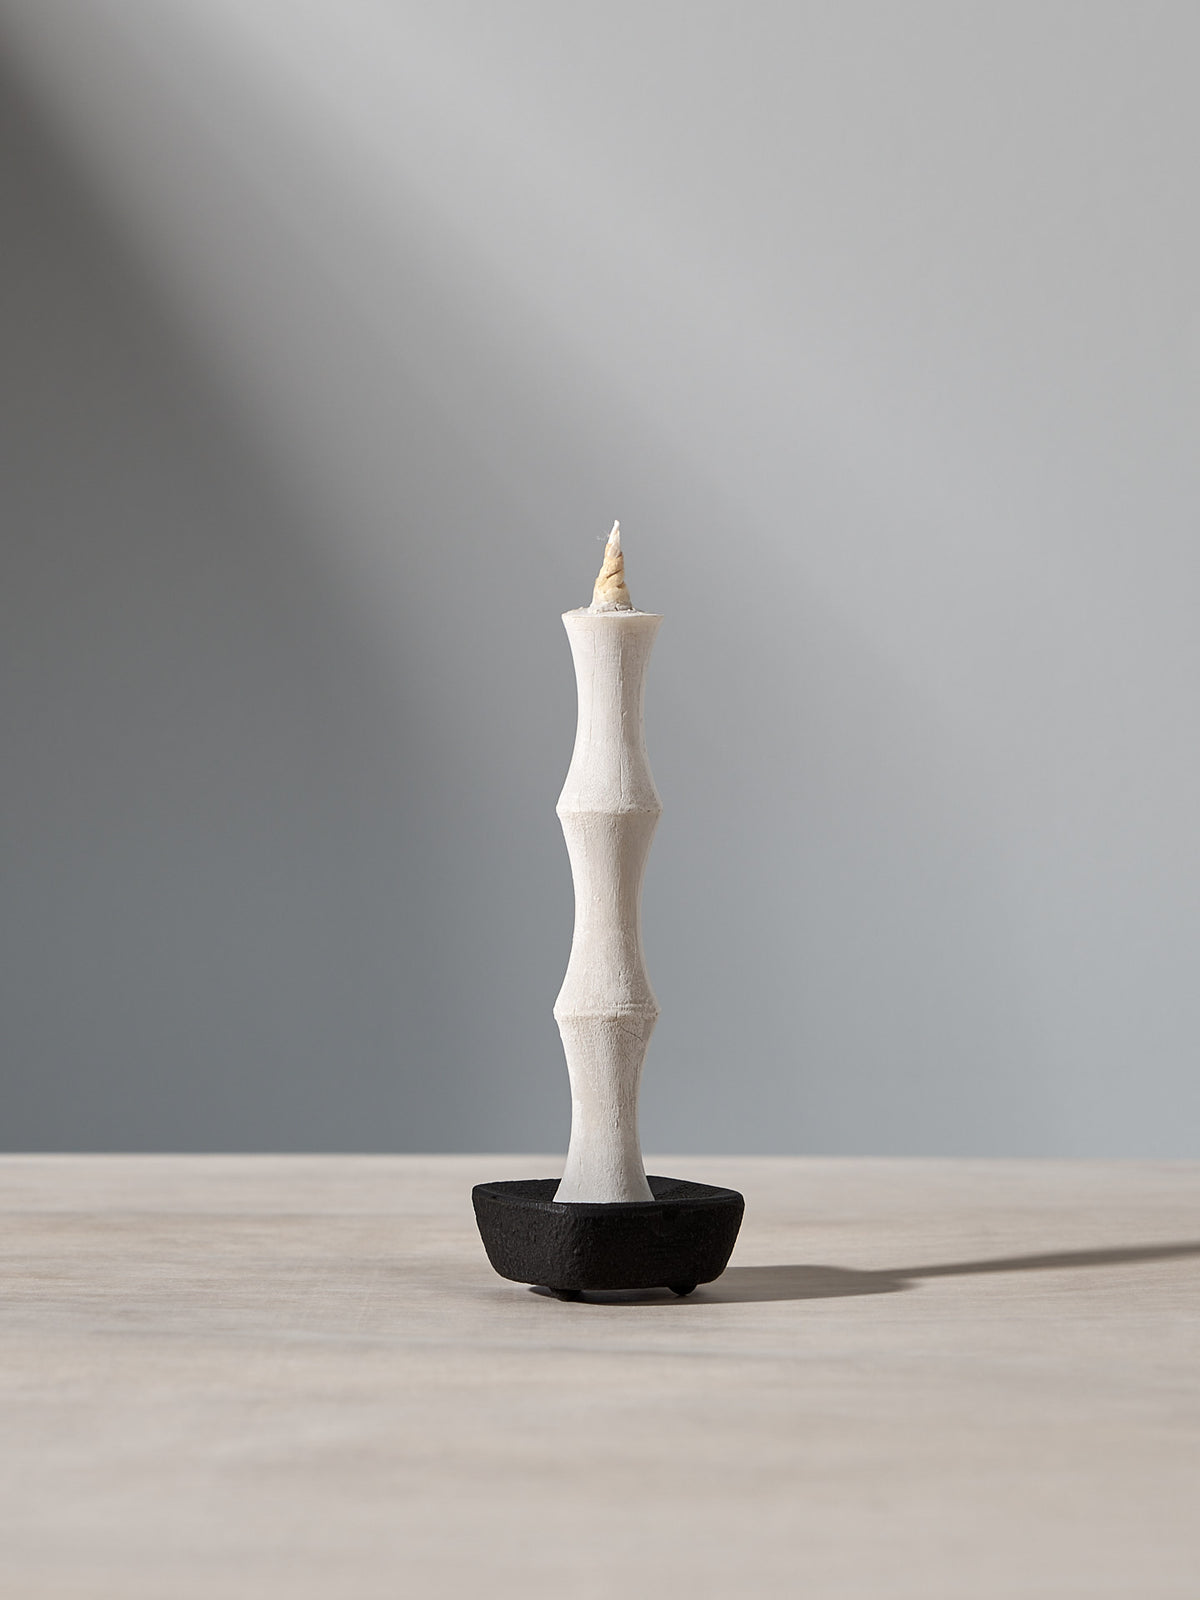 A NANAO – 5 Piece Mixed Box Set candle sitting on top of a wooden table, made by Takazawa.